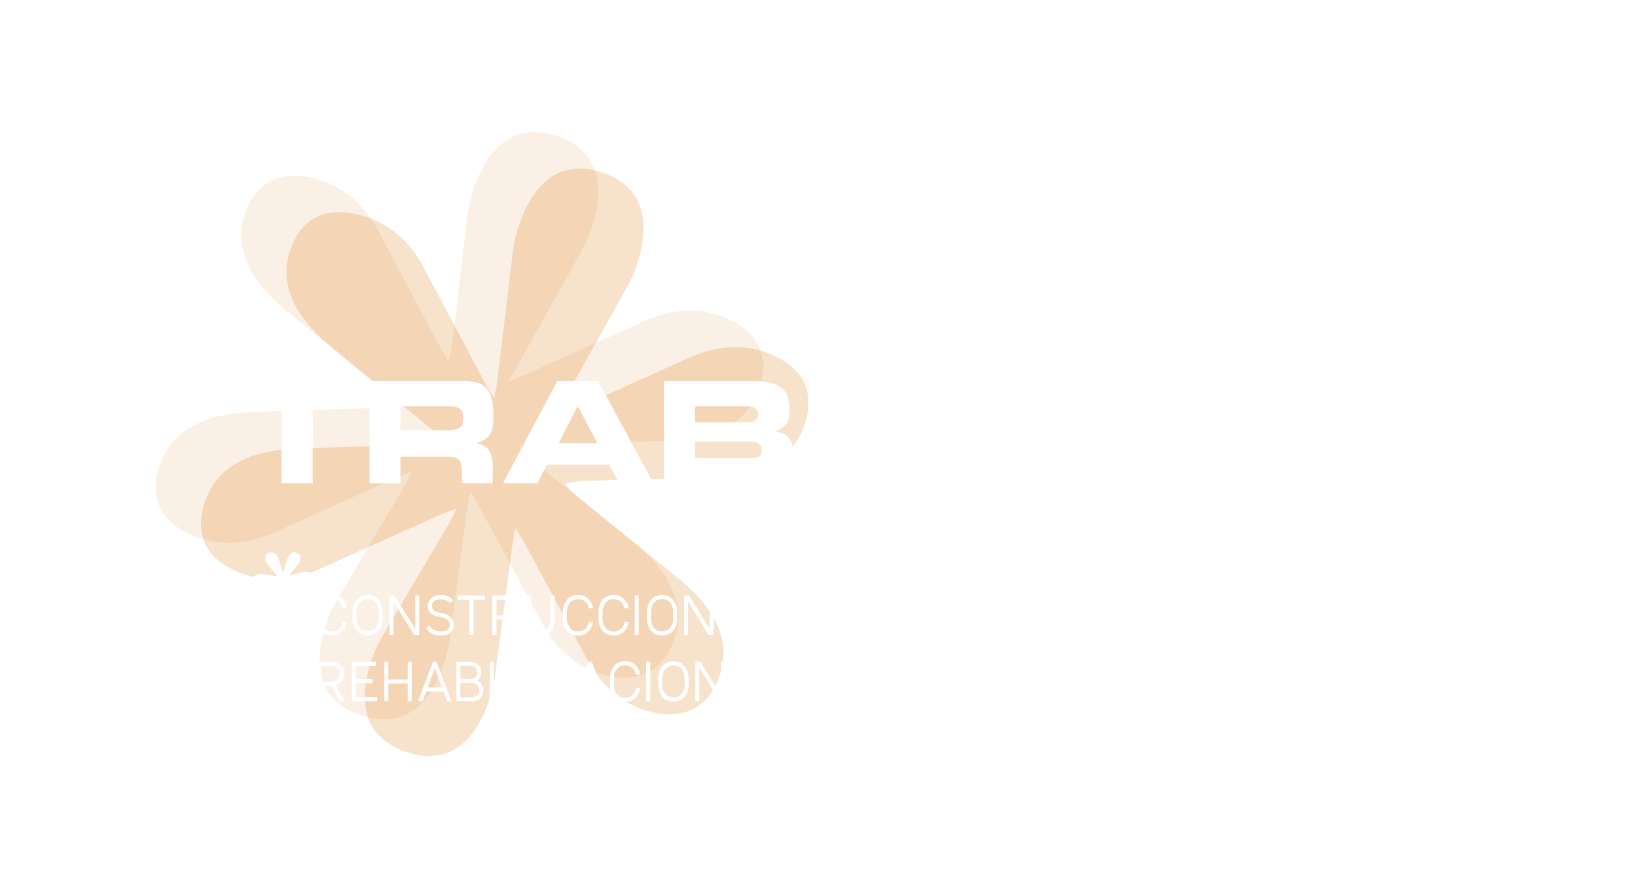 Trabecon